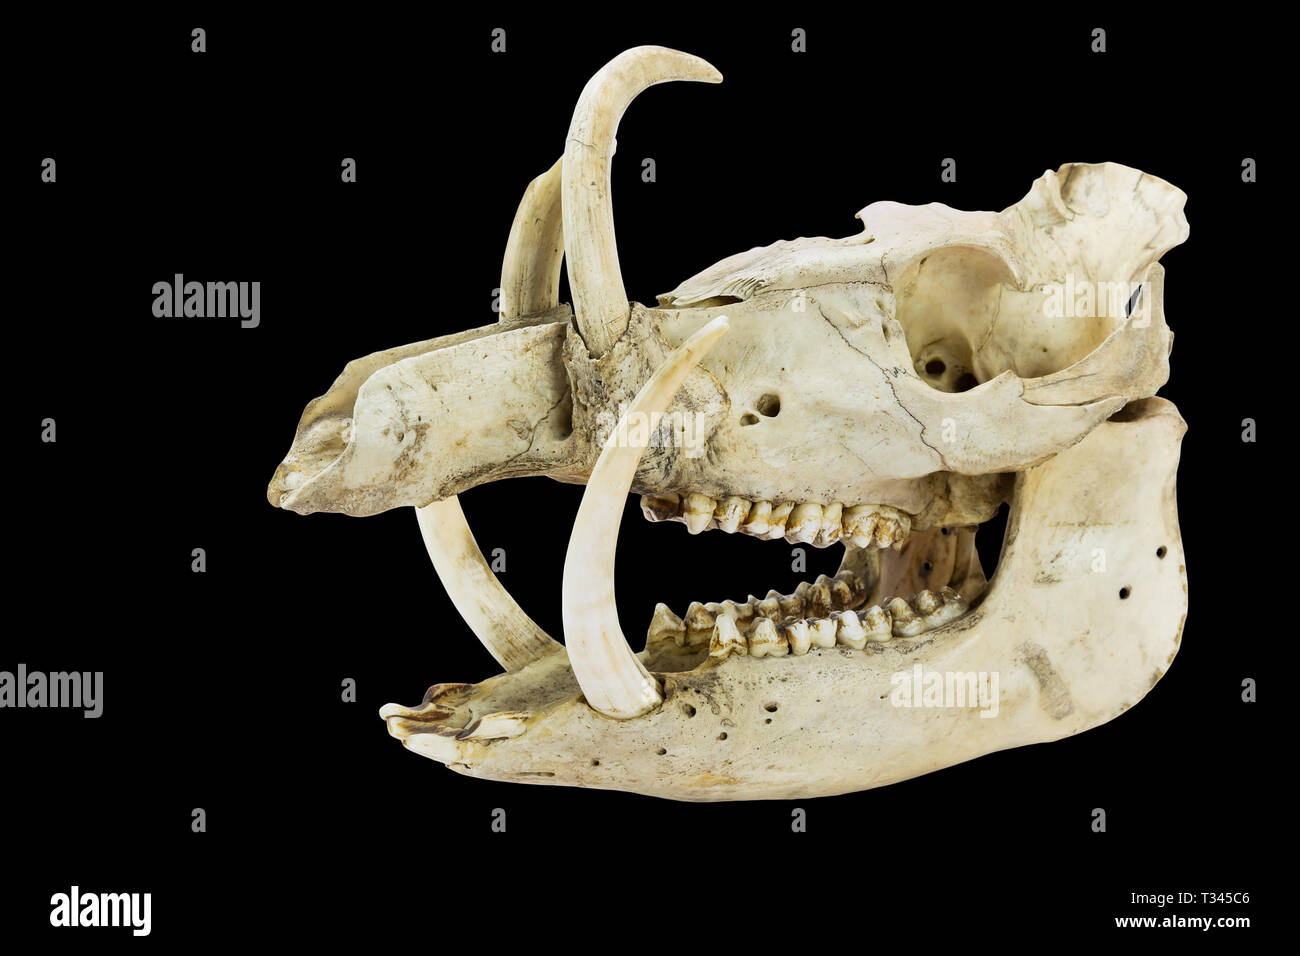 Skull with long tusks and teeth of wild boar isolated on black background Stock Photo